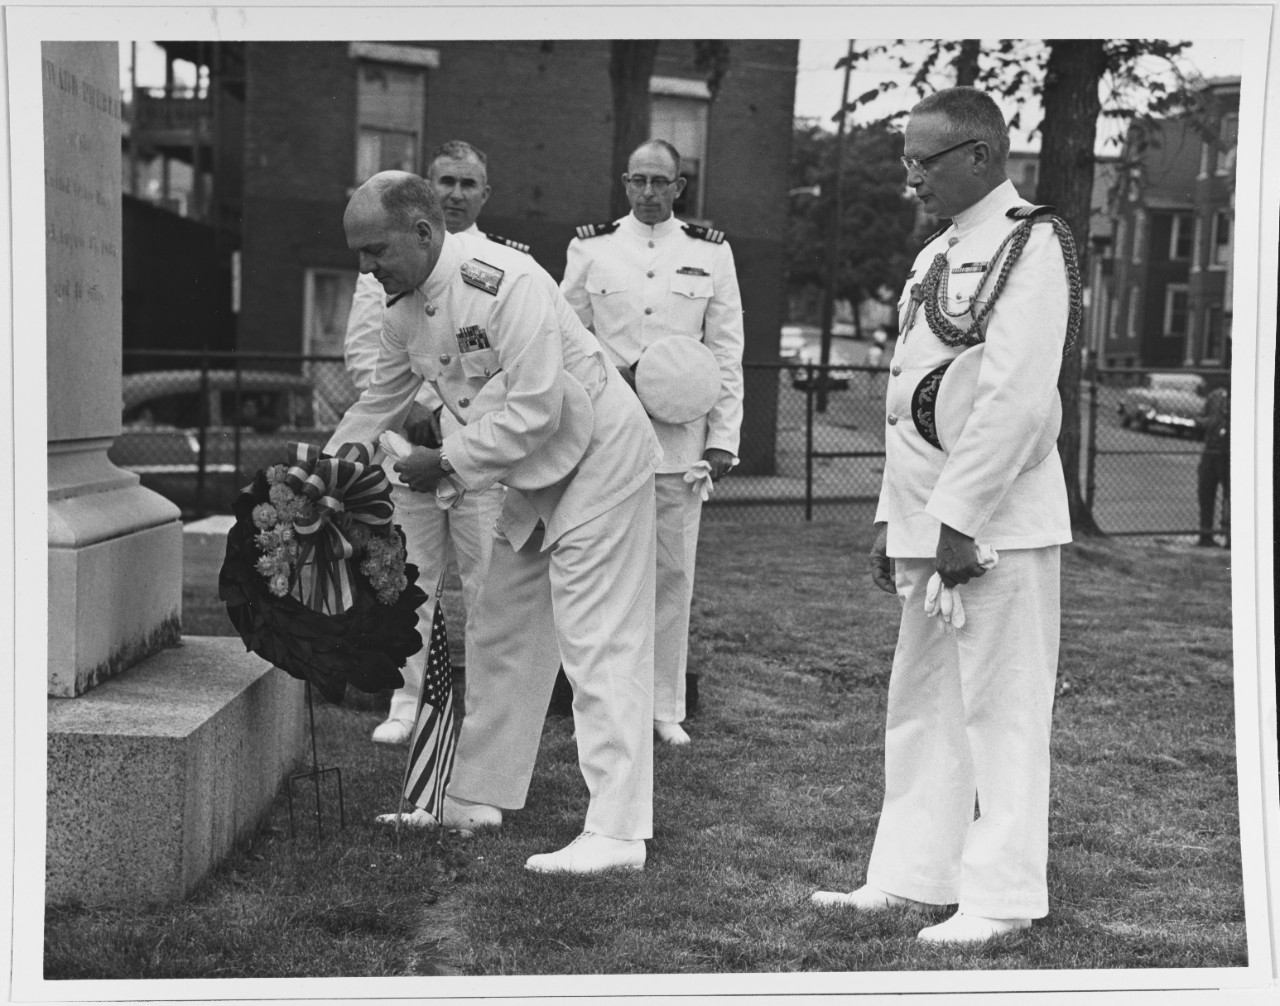 Vice Admiral Taylor placing a wreath on Commodore Edward Preble's grave. Captain Lloyd, Commander Forrestall and Captain Anderson. July 4, 1962